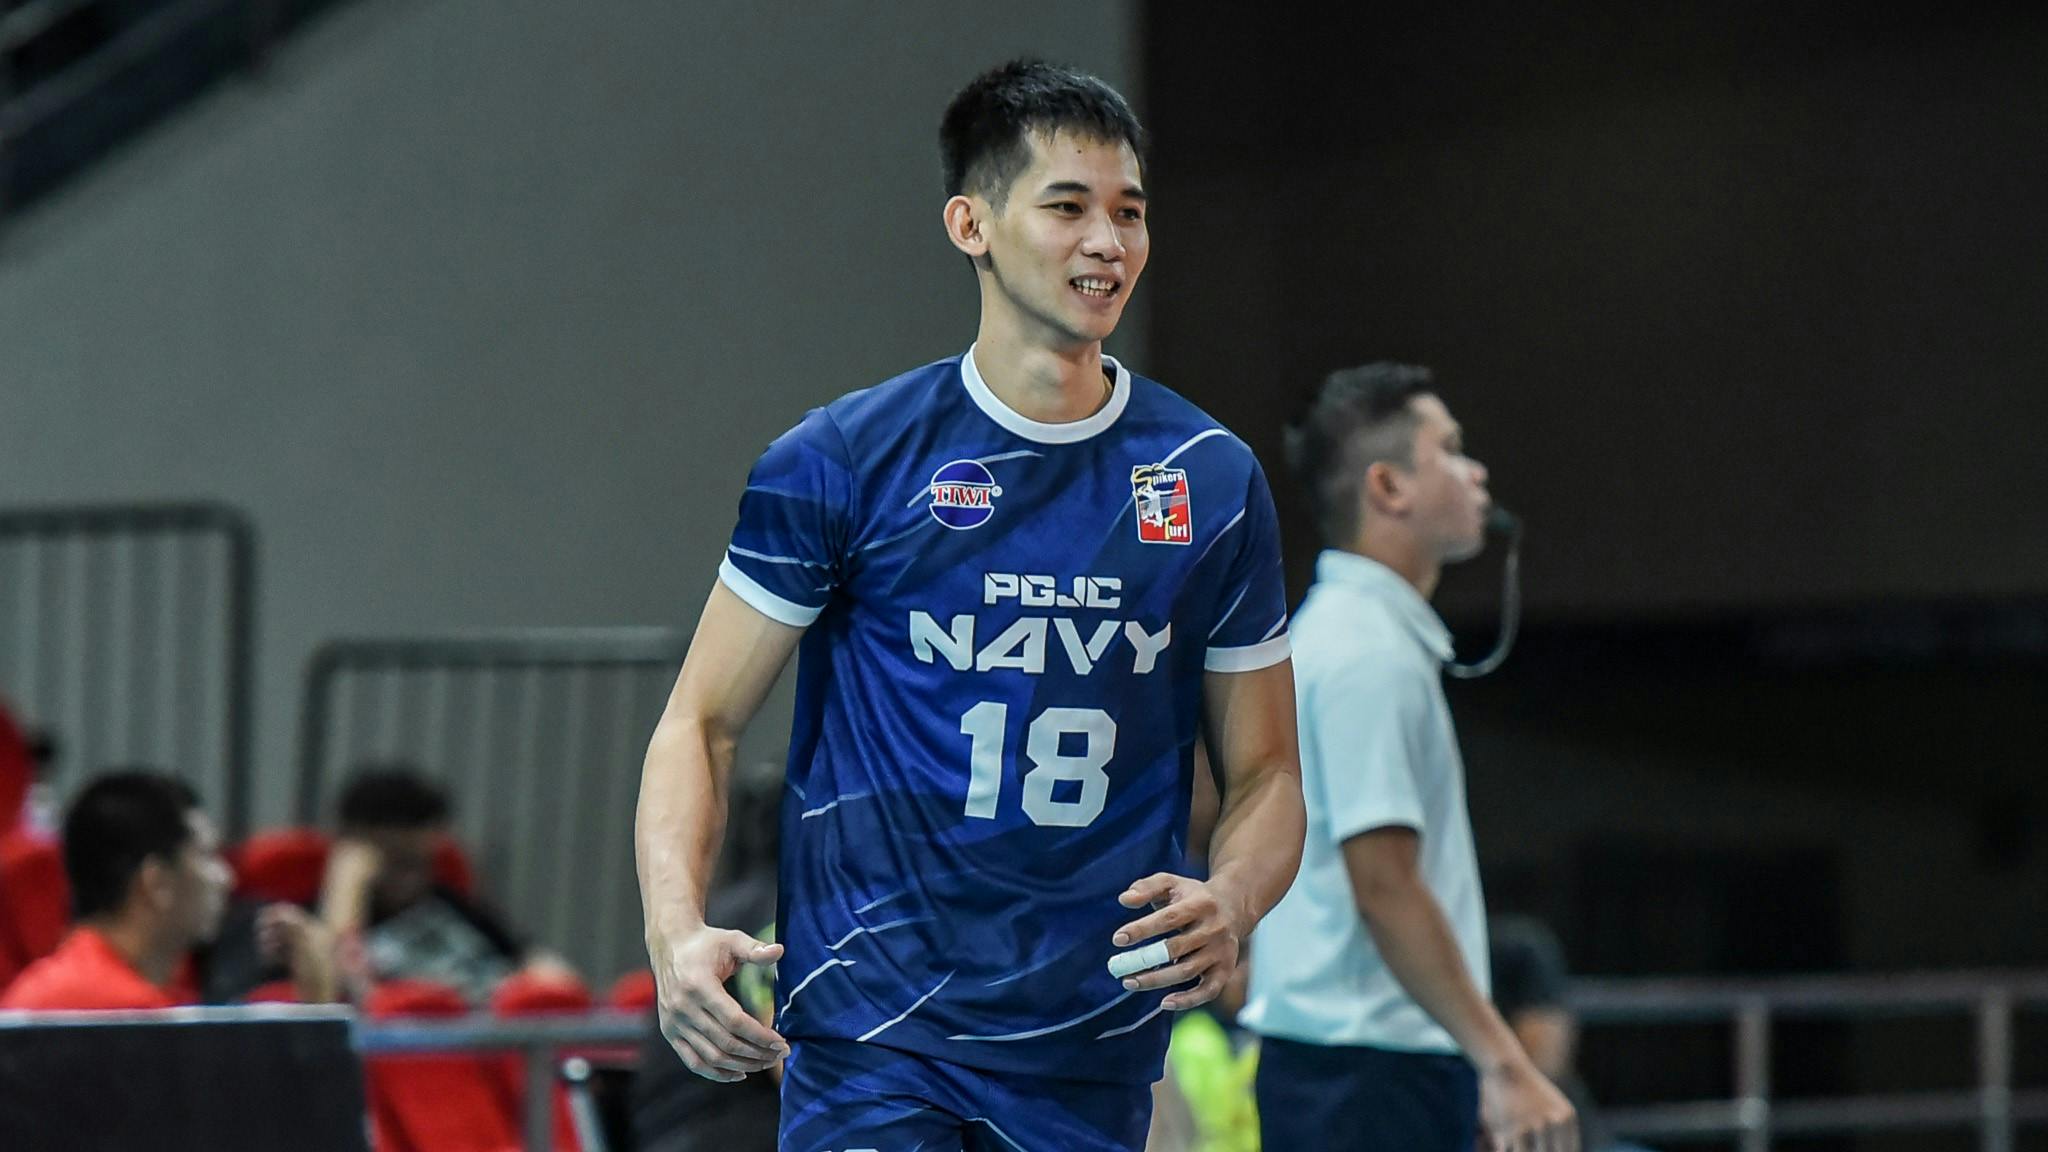 Spikers’ Turf: Joeven Dela Vega, PGJC-Navy sink VNS-Nasty for fifth-straight win